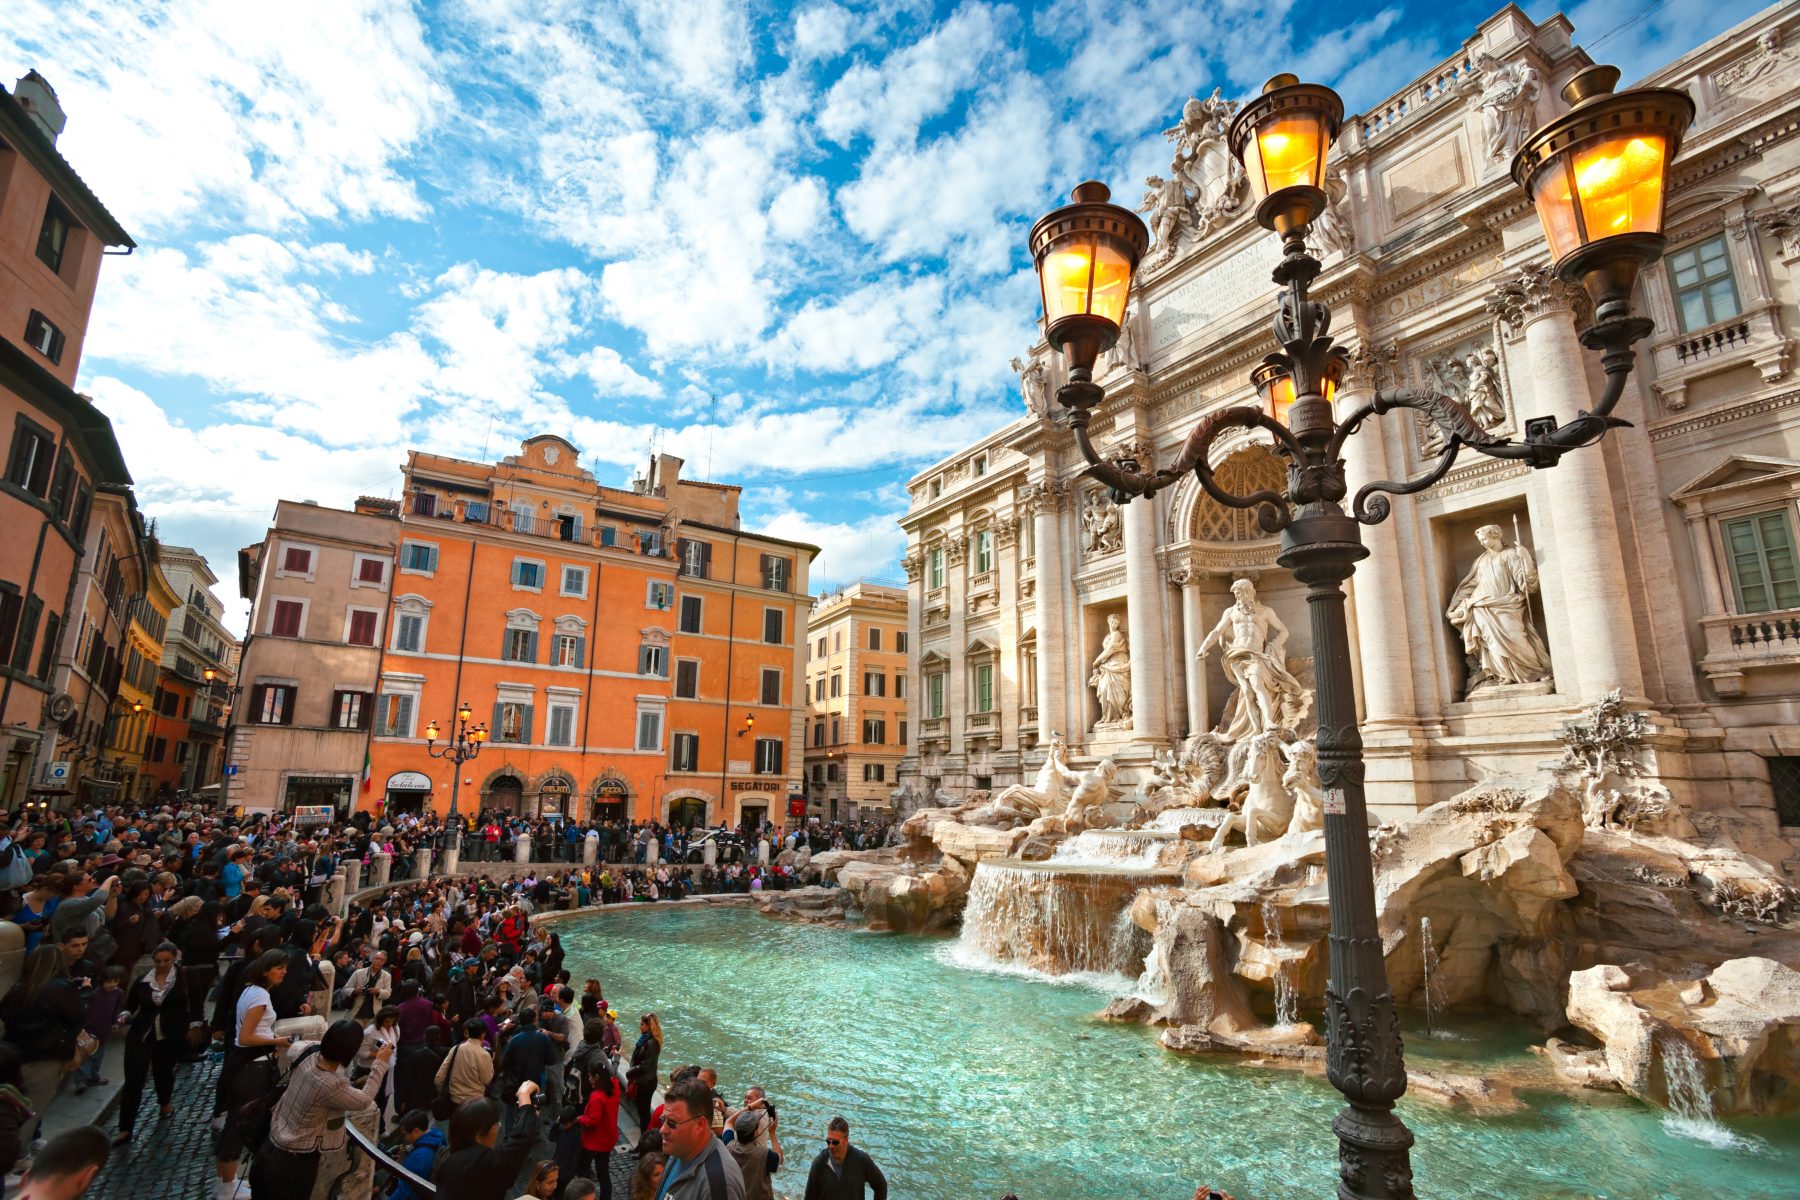 Trevi Fountain with all its tourists